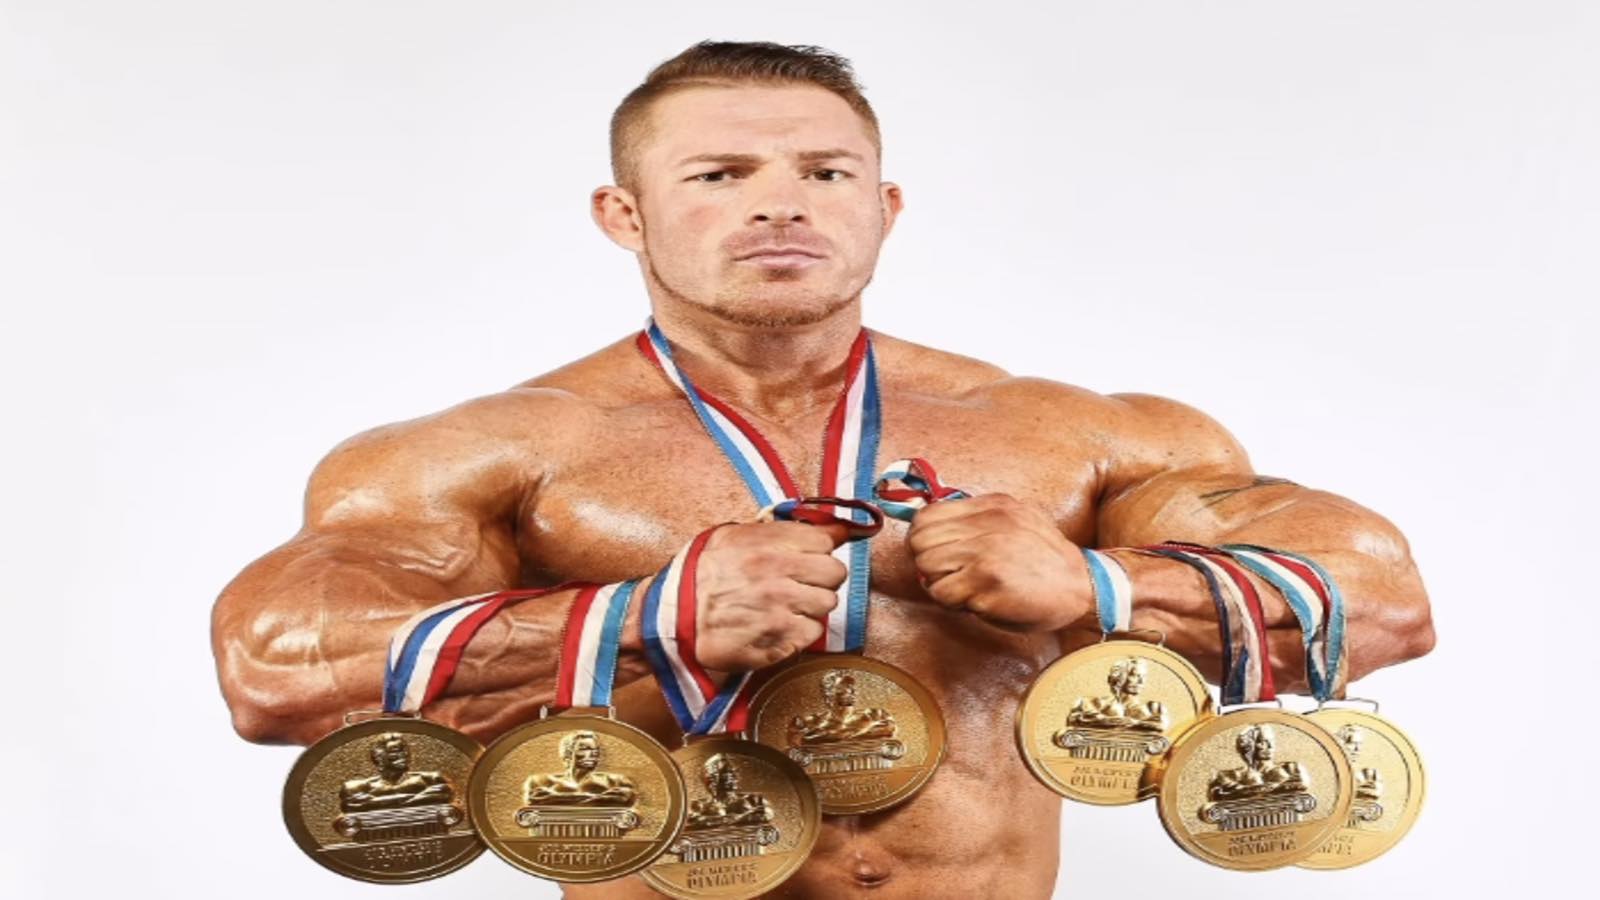 Flex-Lewis-Holding-All-His-Olympia-Medals.jpg